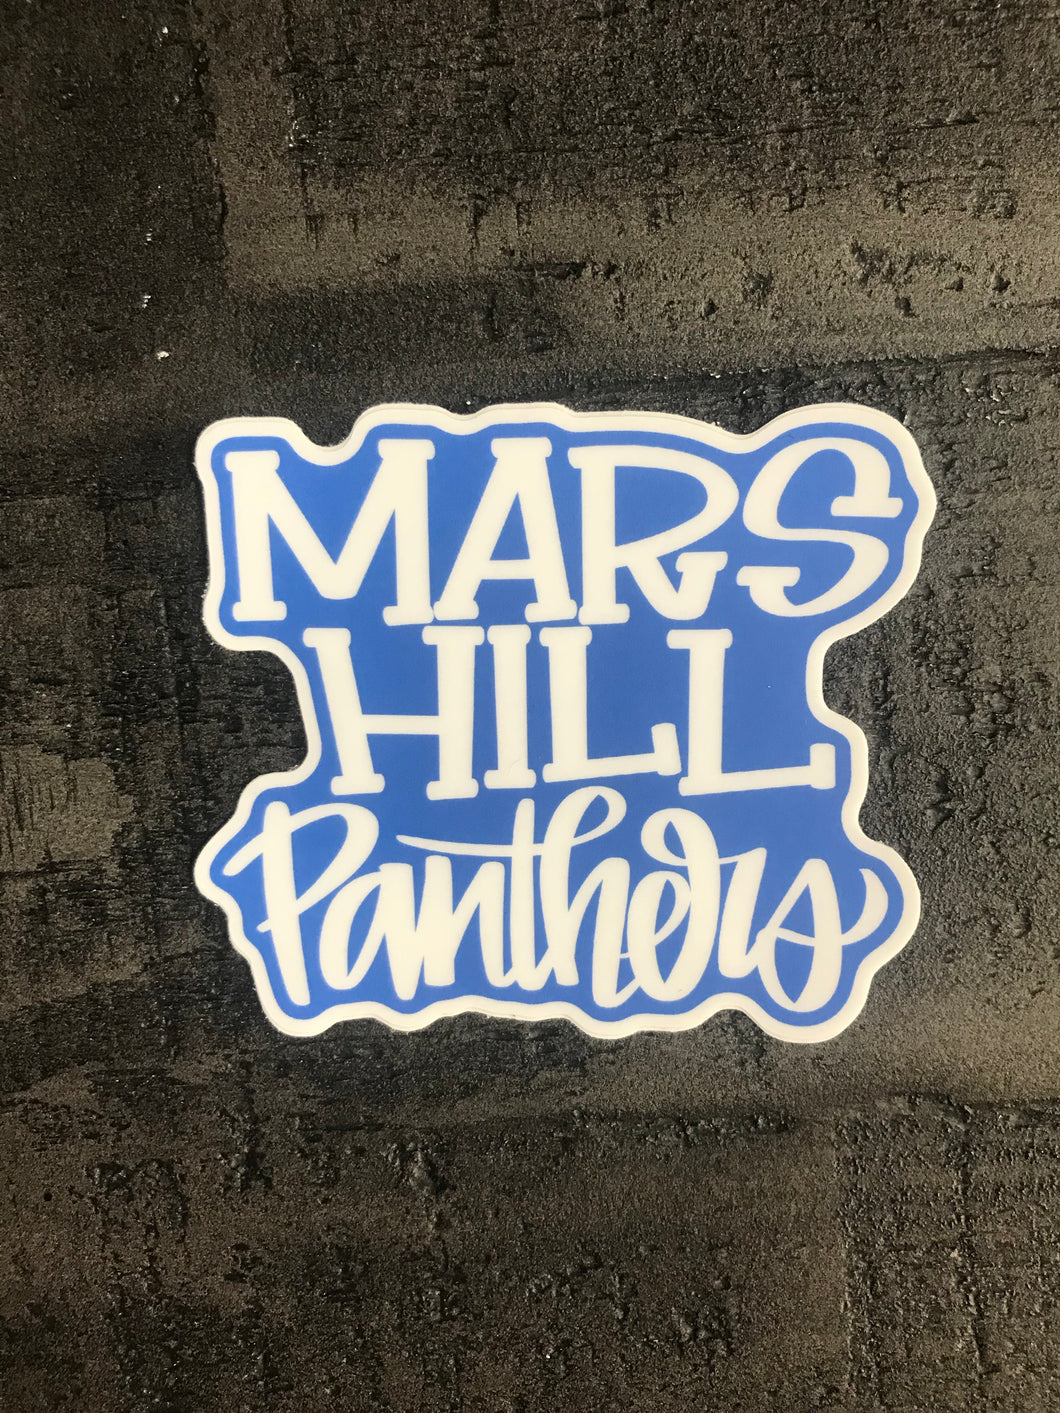 Mars Hill Panthers